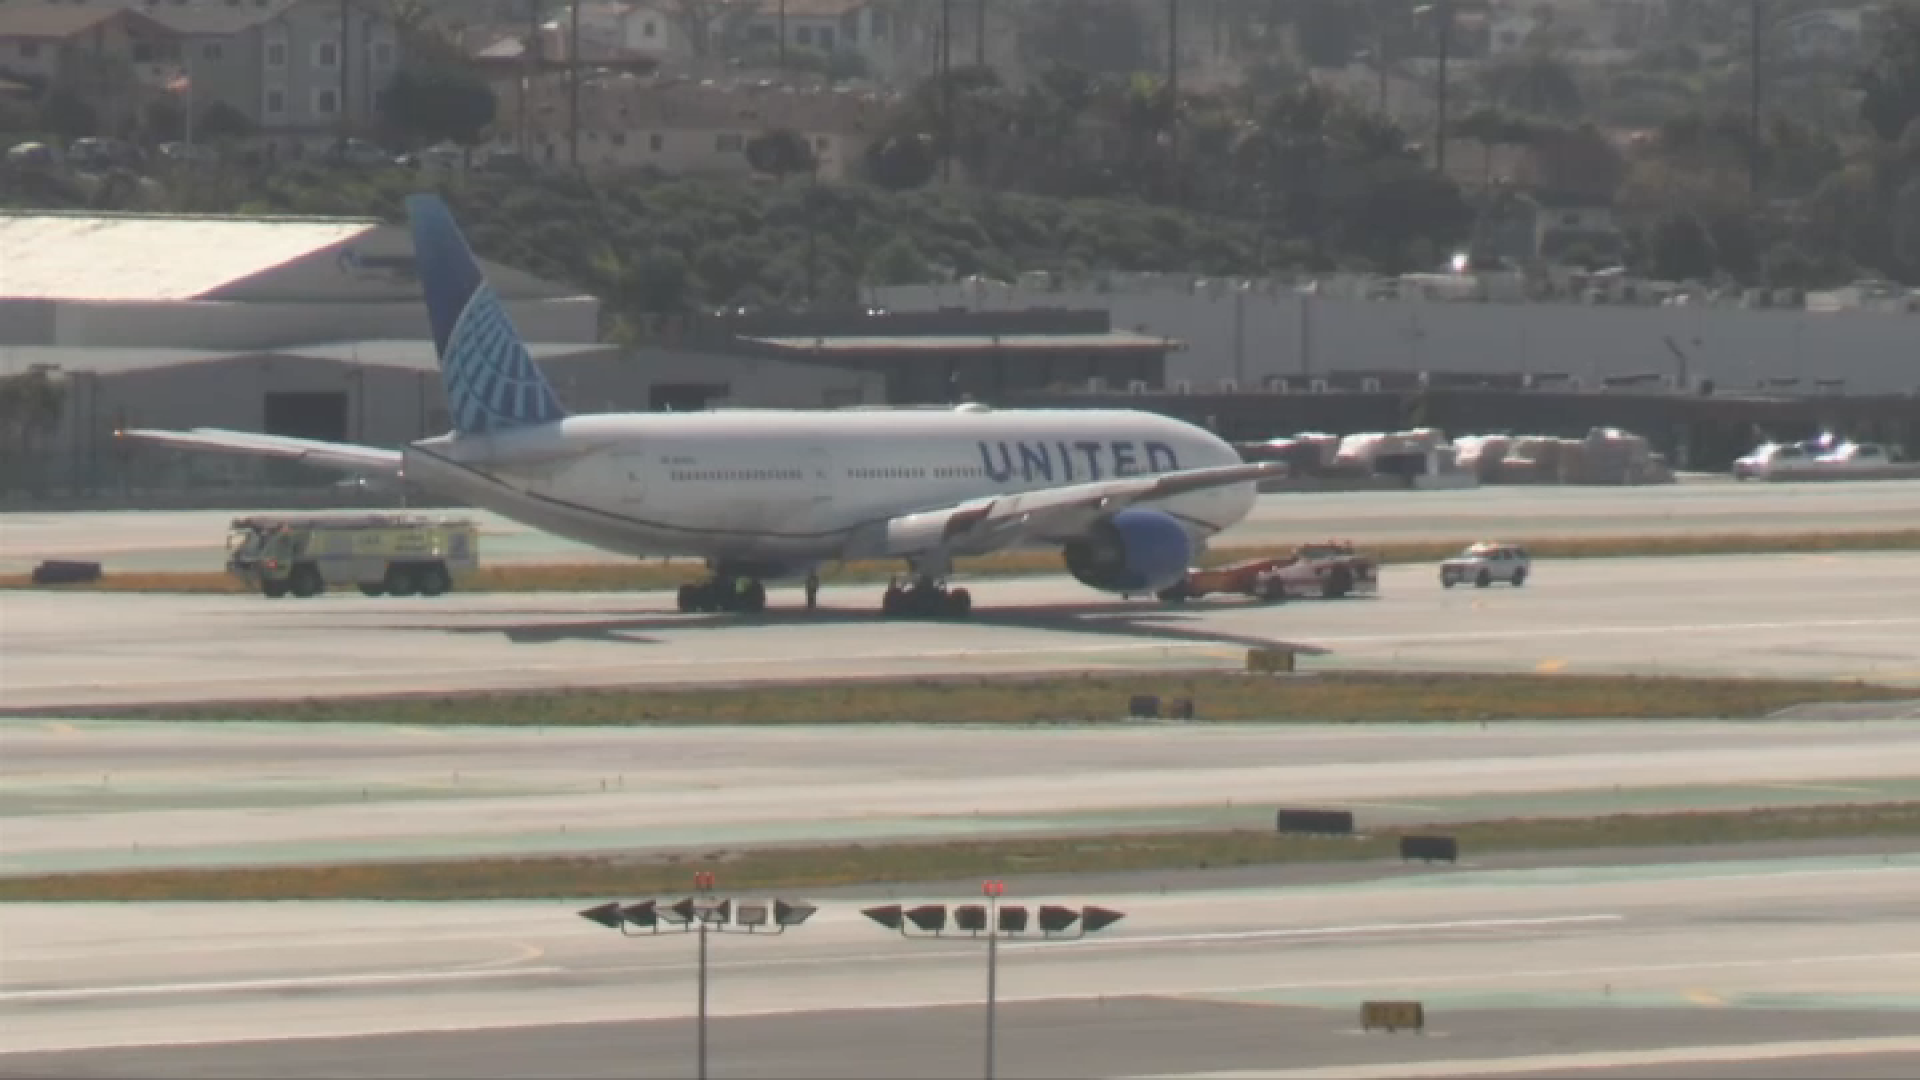 UA35: United flight from SFO to Japan loses tire during takeoff